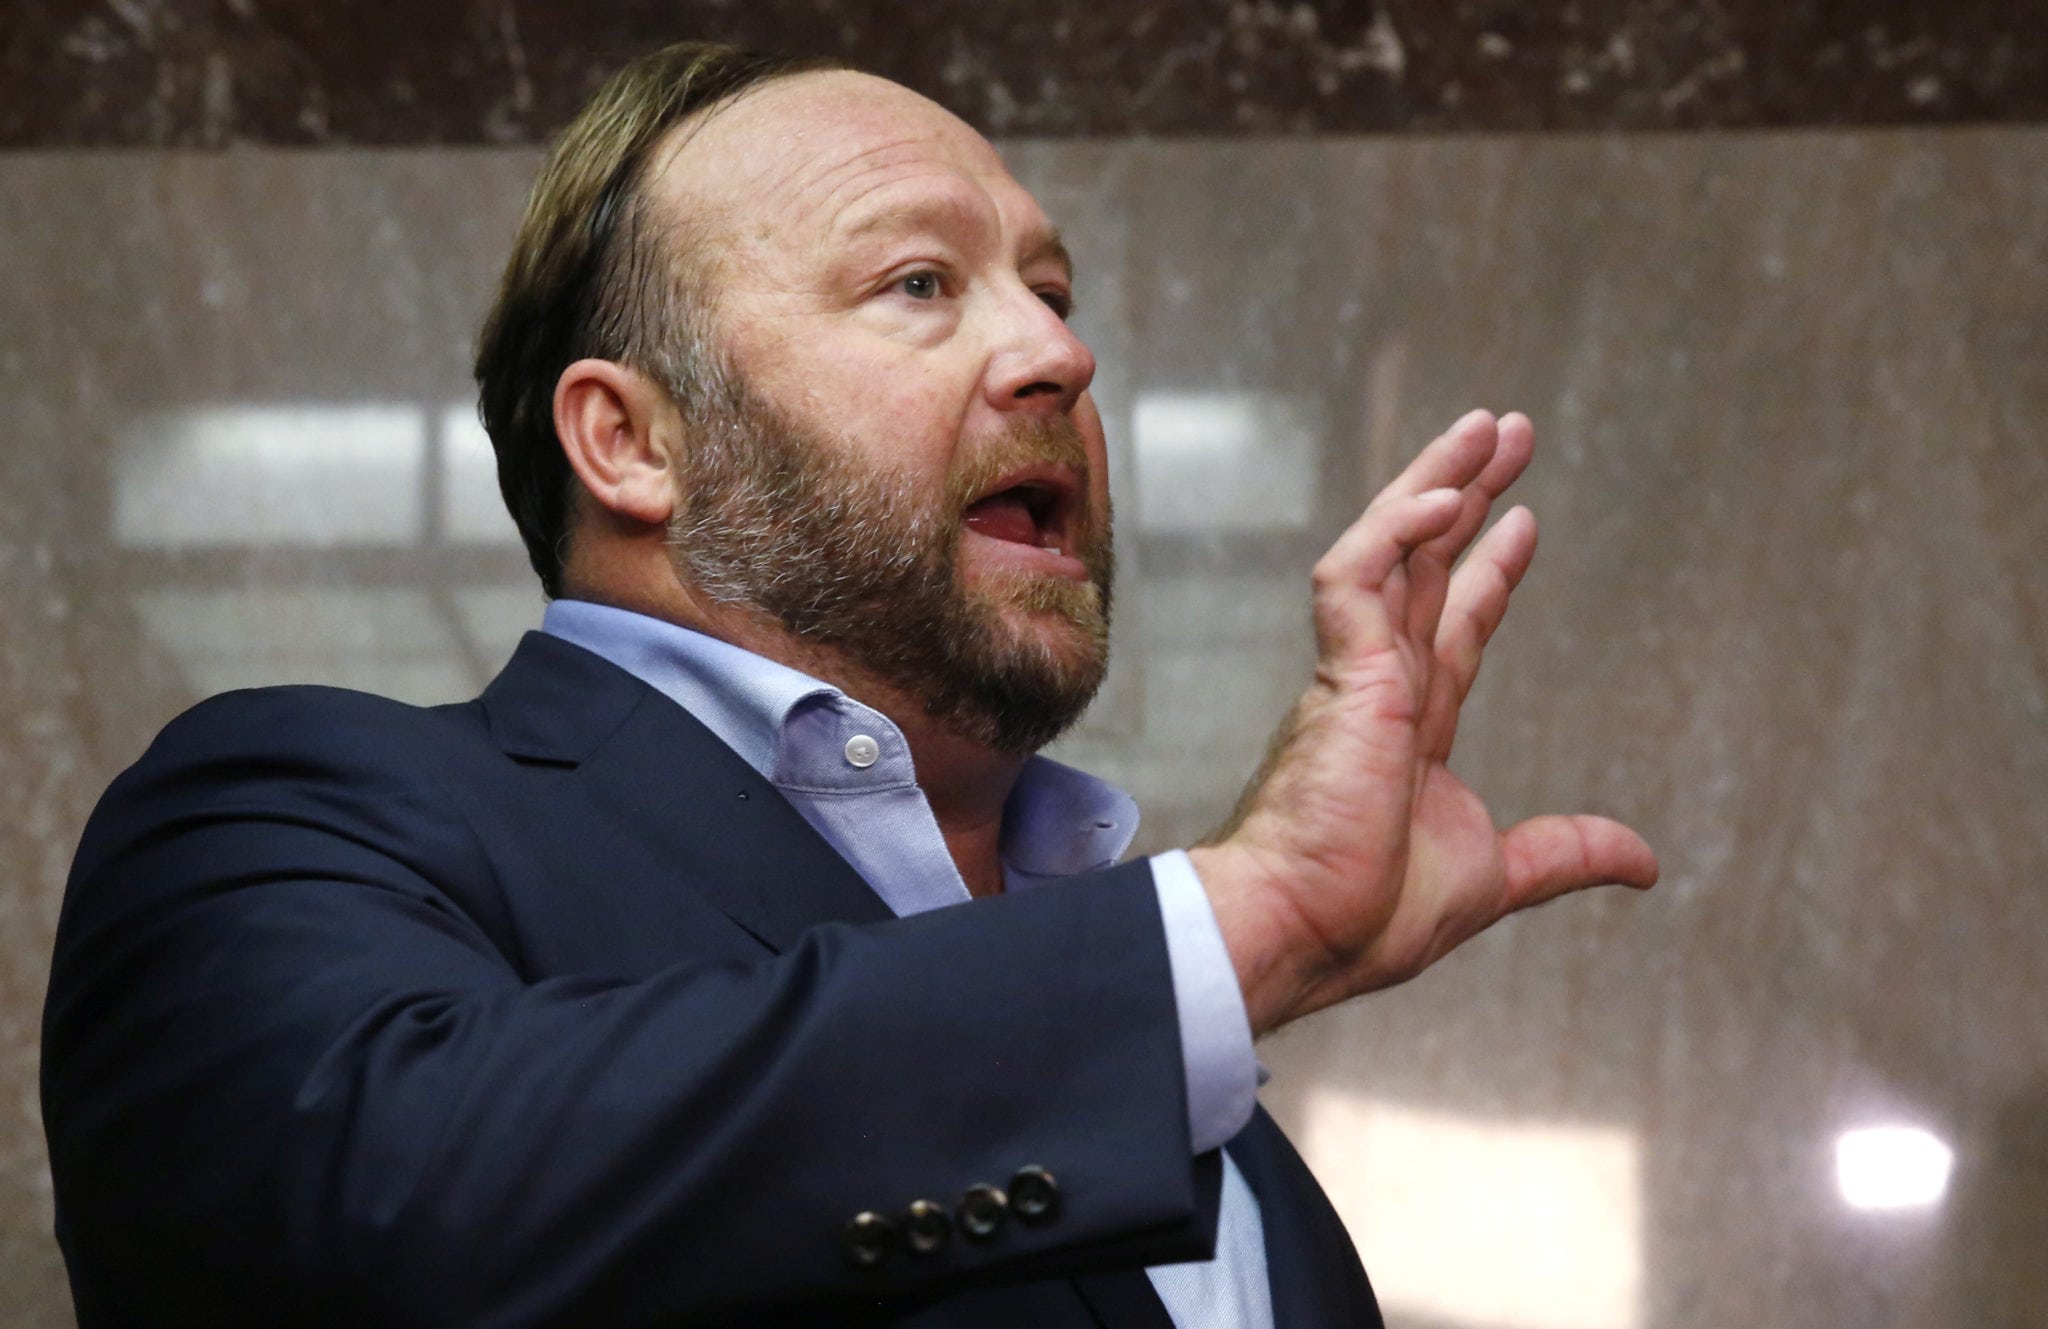 Alex Jones Could Be Put Out Of Business As Jury Selection Begins In Sandy Hook Defamation Trial